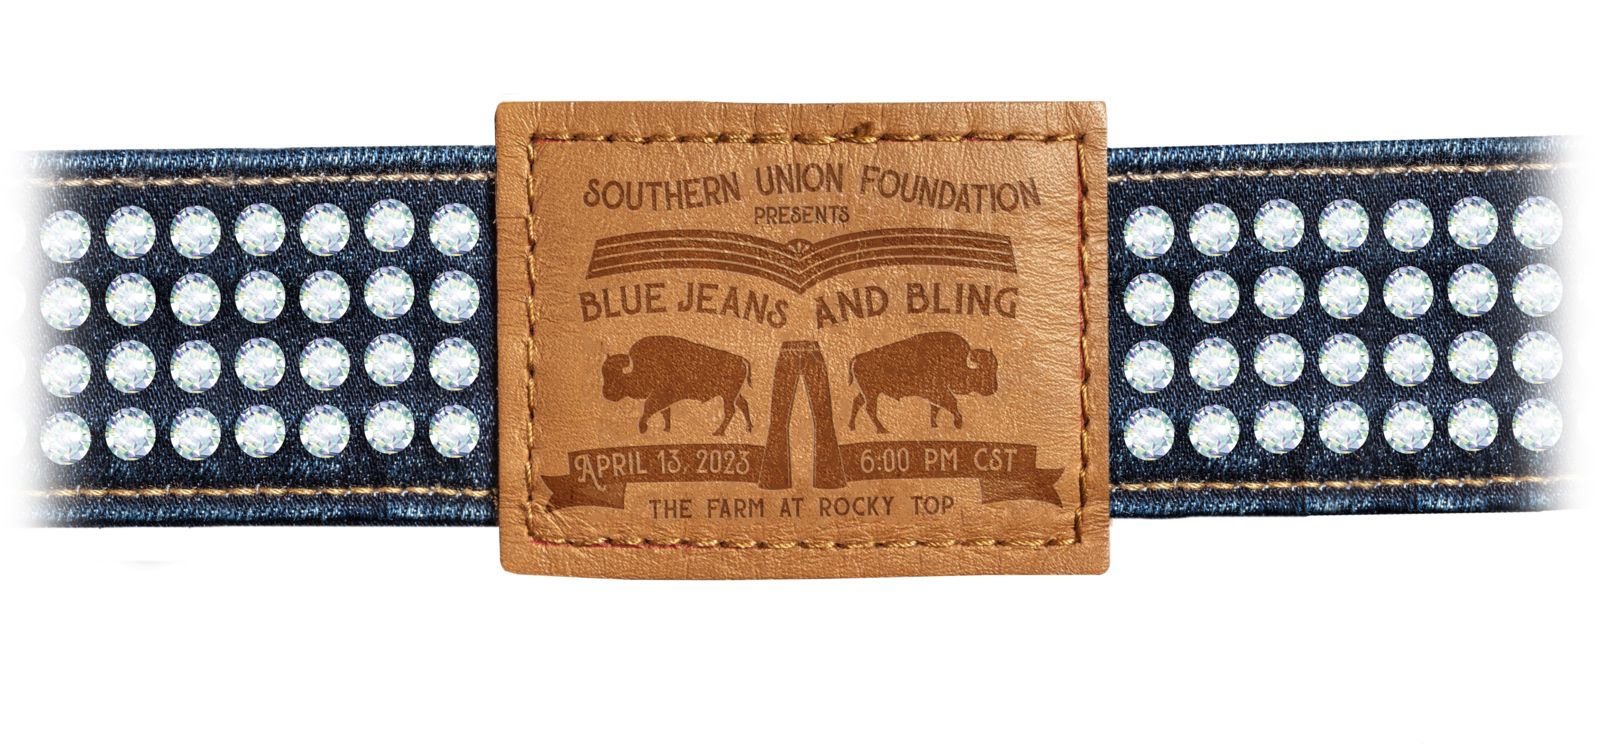 Blue Jean and Bling photo